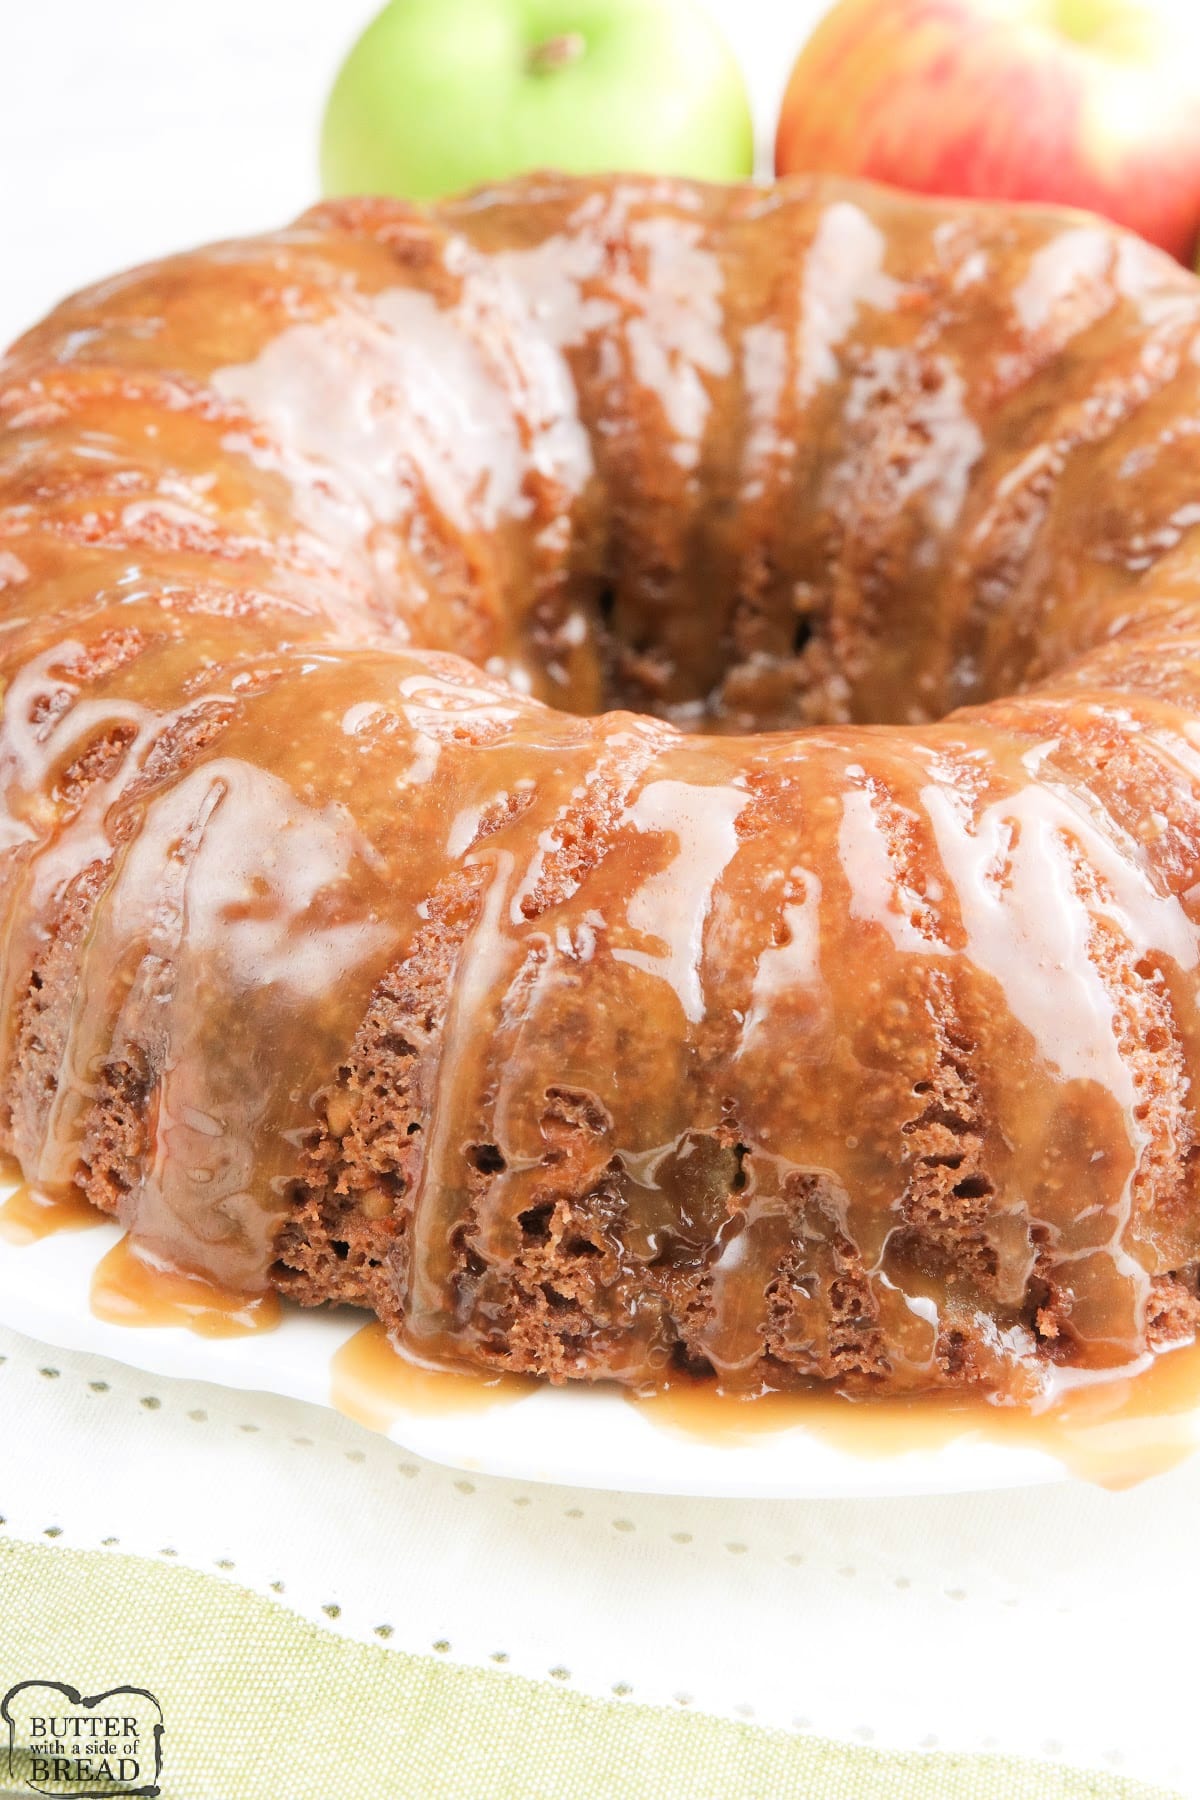 Apple cake with a simple brown sugar glaze